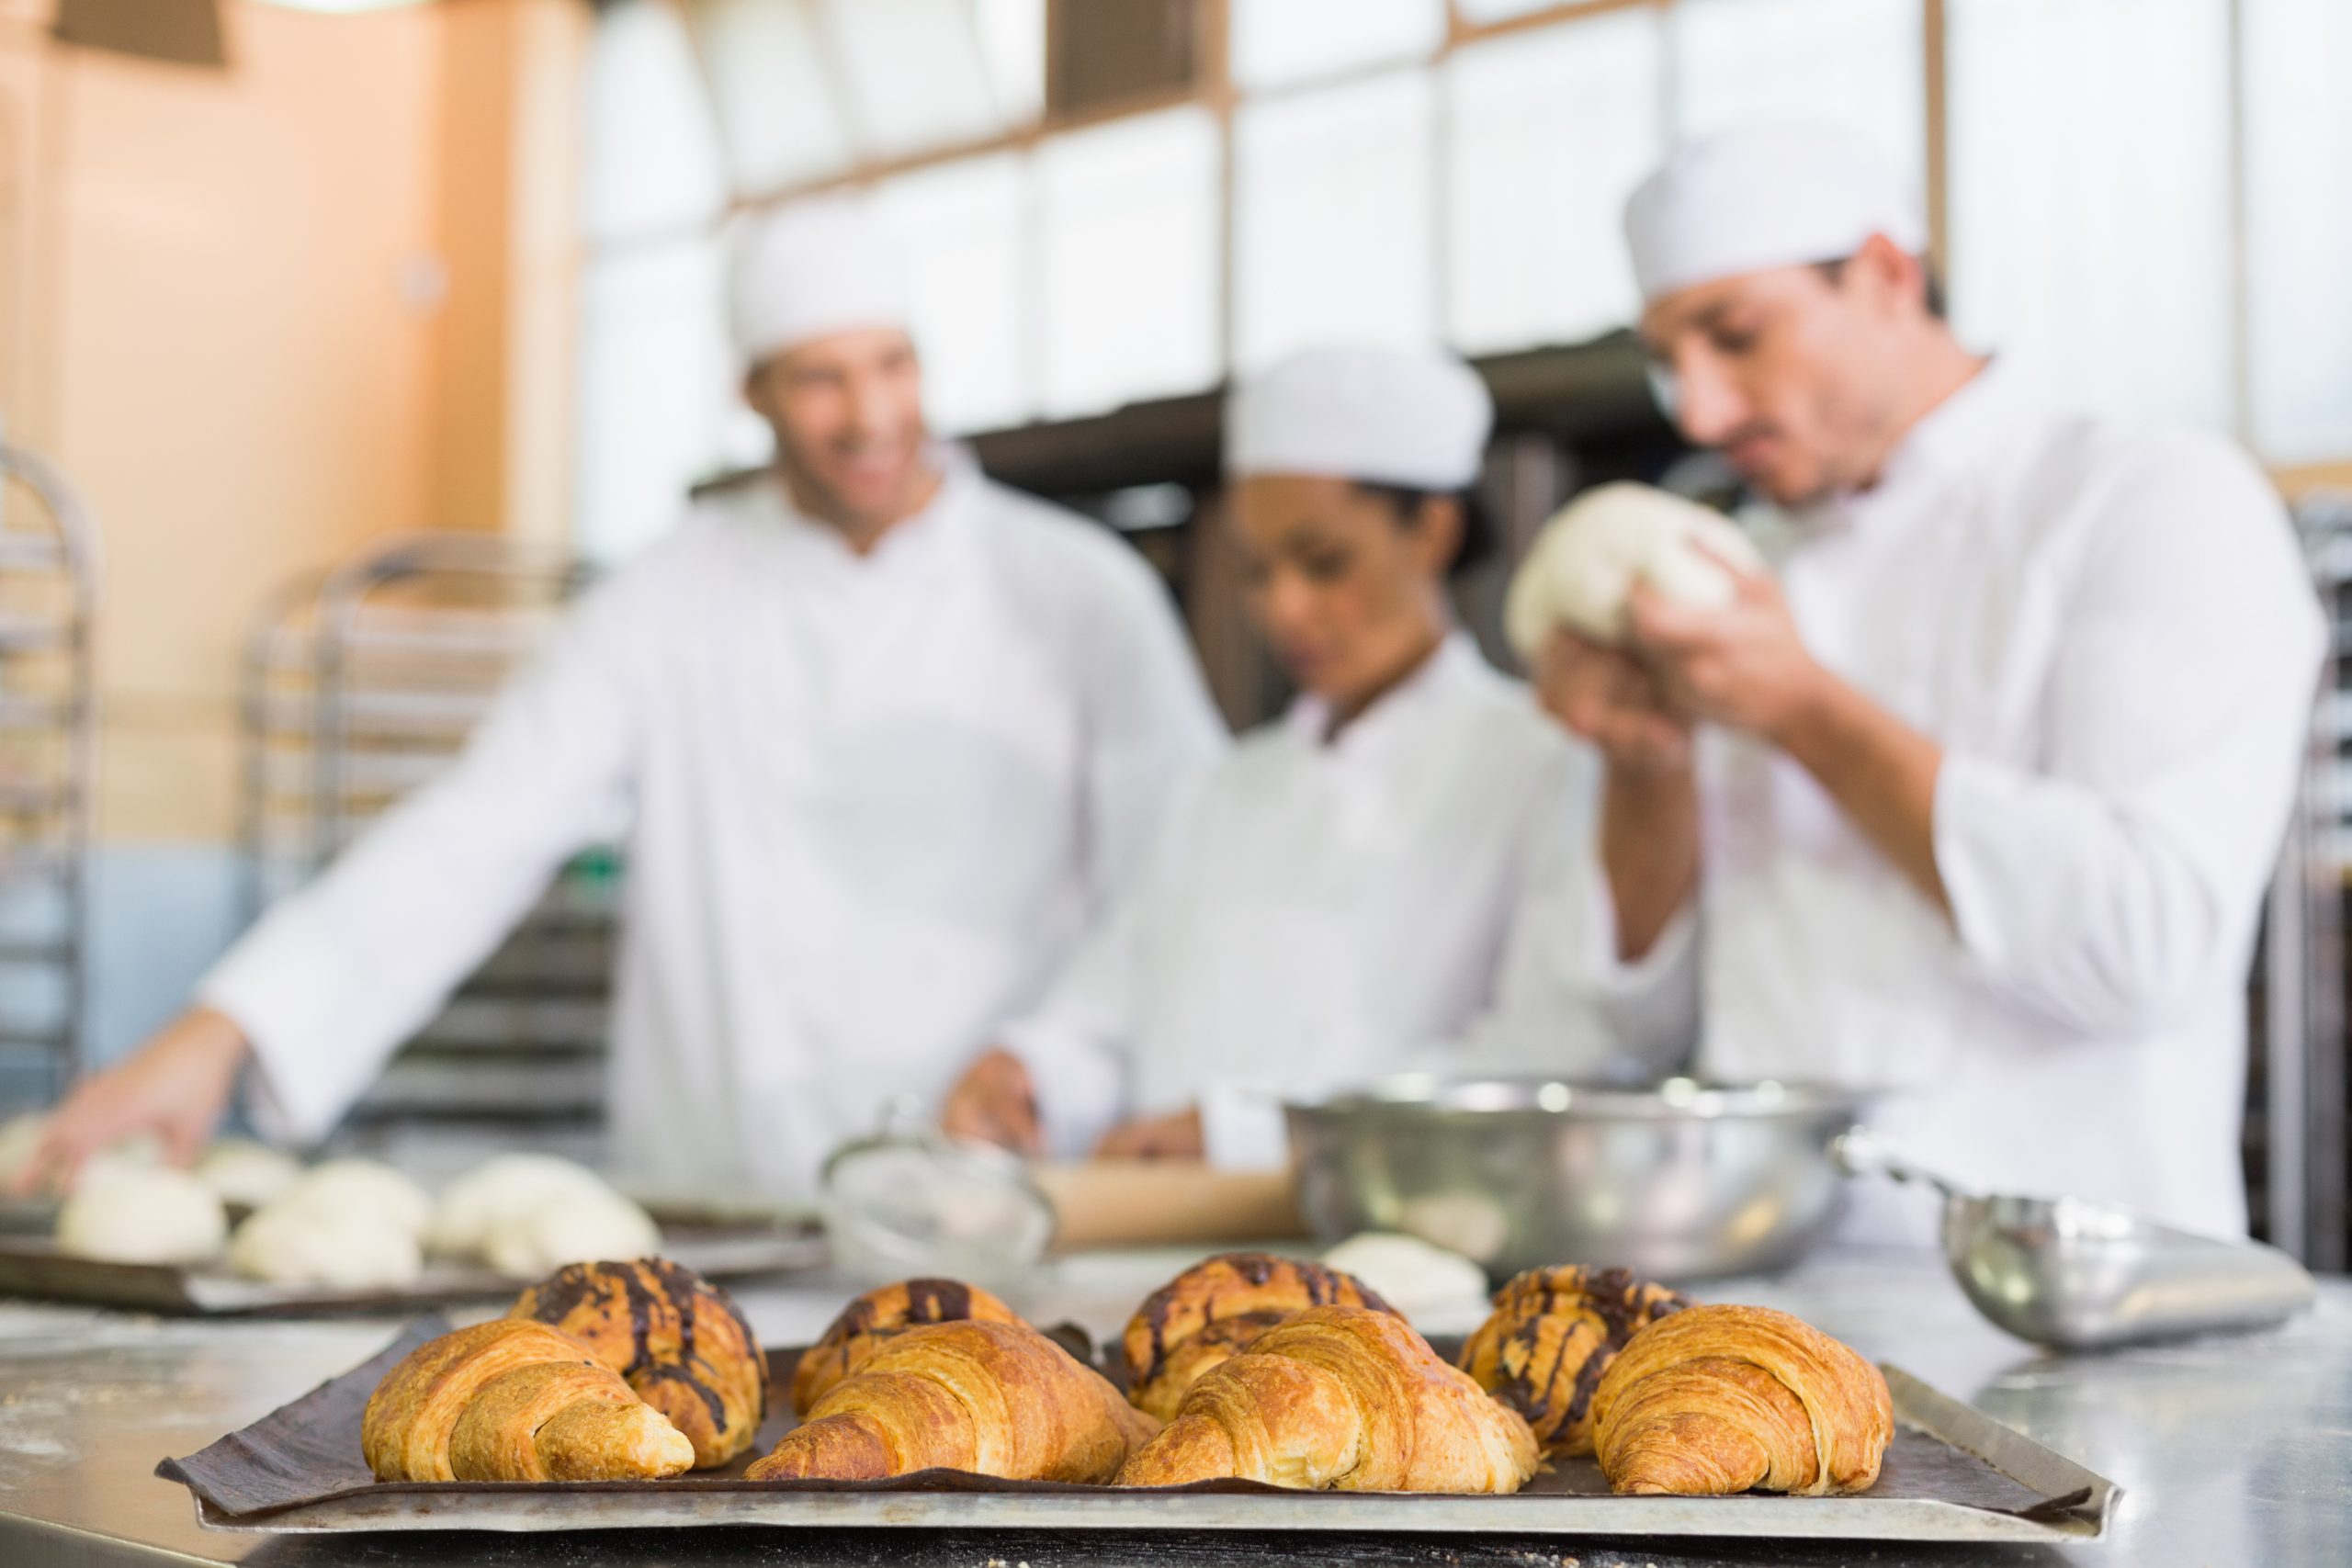 Image of bakers for our FAQ on What Is the Best Degree Path for Becoming a Baker